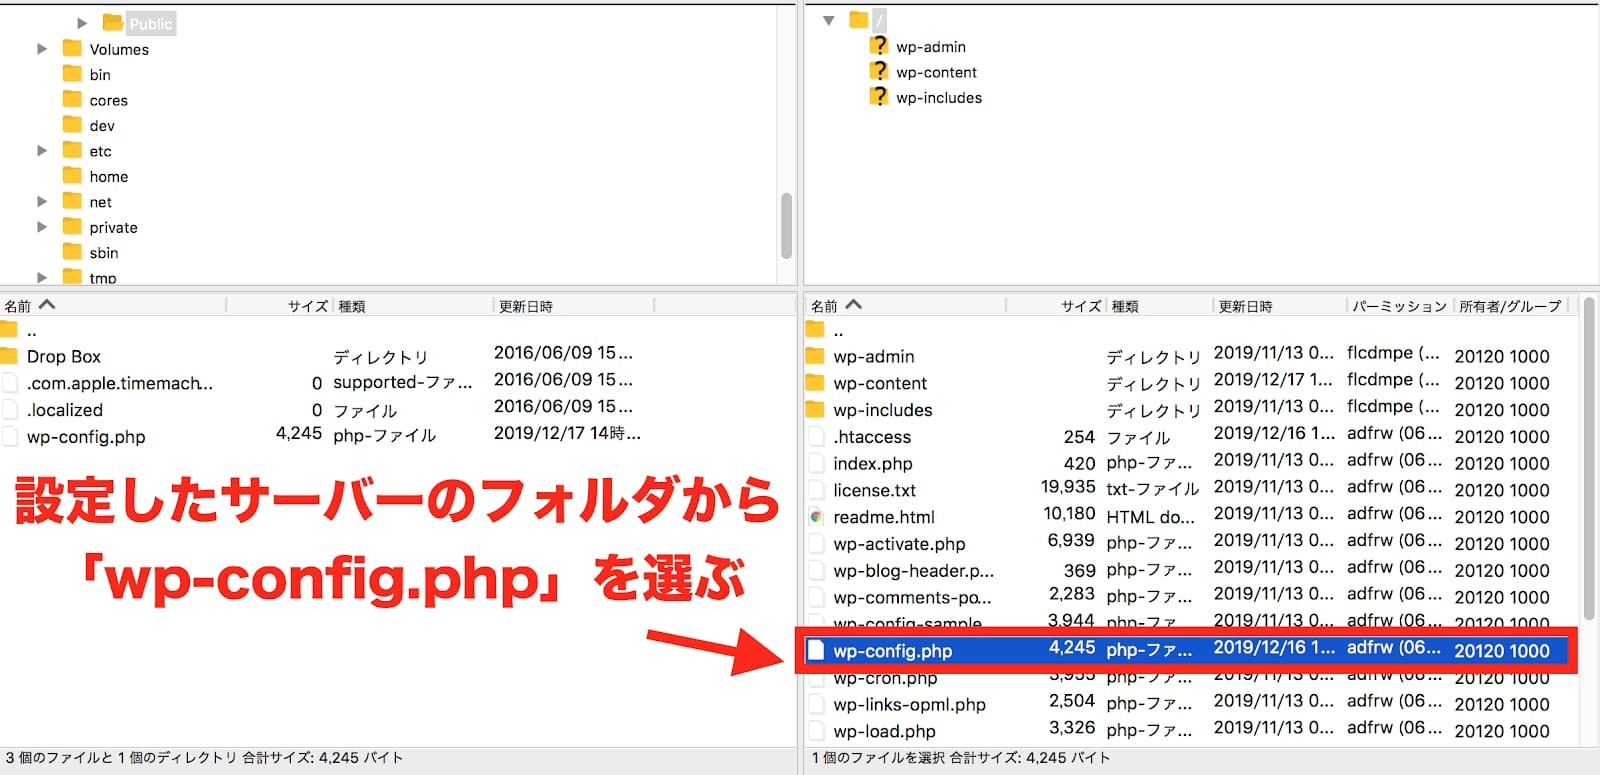 FTPソフトで404（Not Found）を解決する方法_1